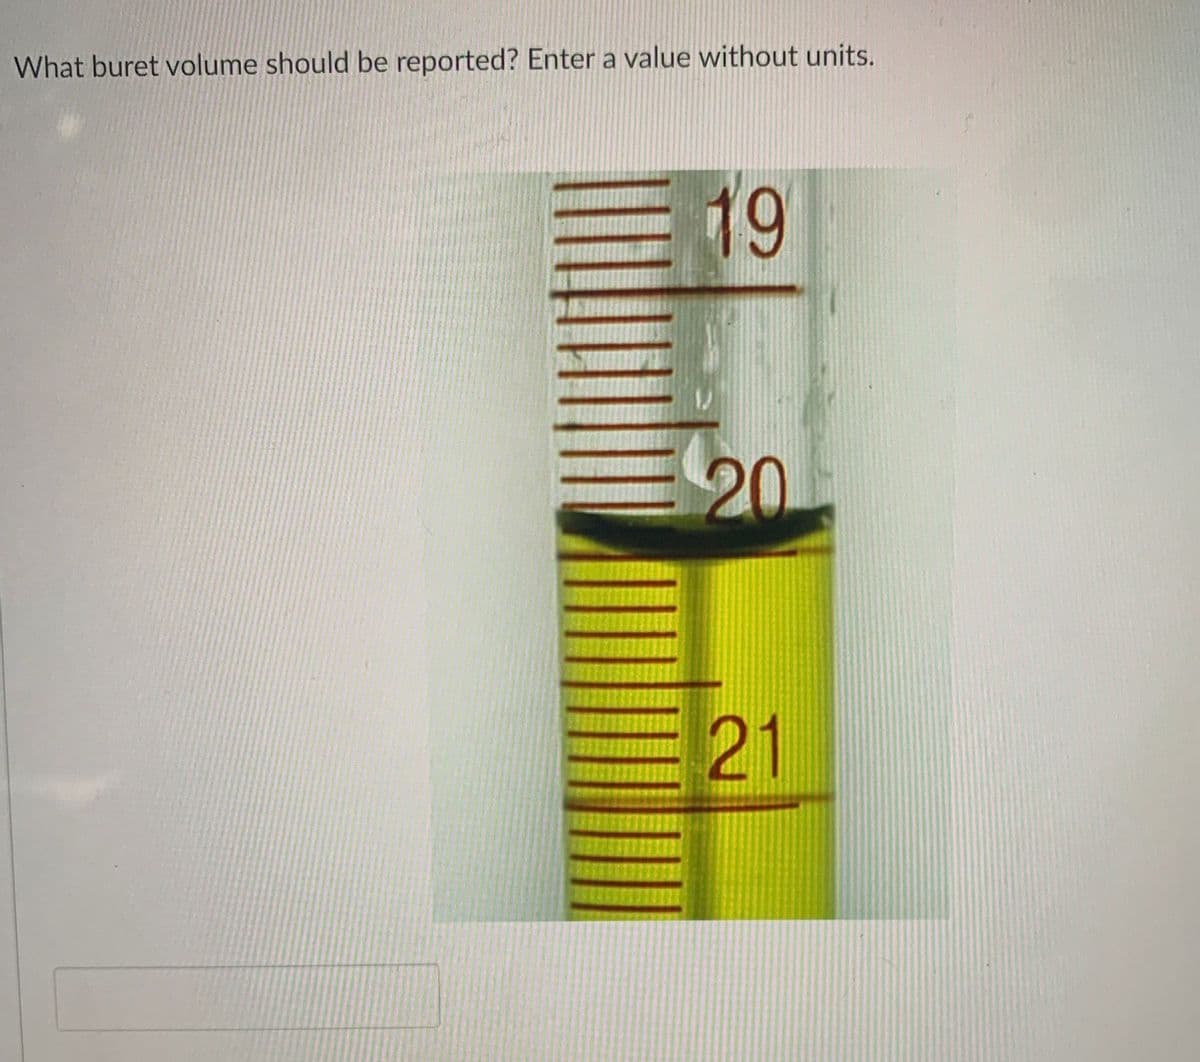 What buret volume should be reported? Enter a value without units.
19
20
21
